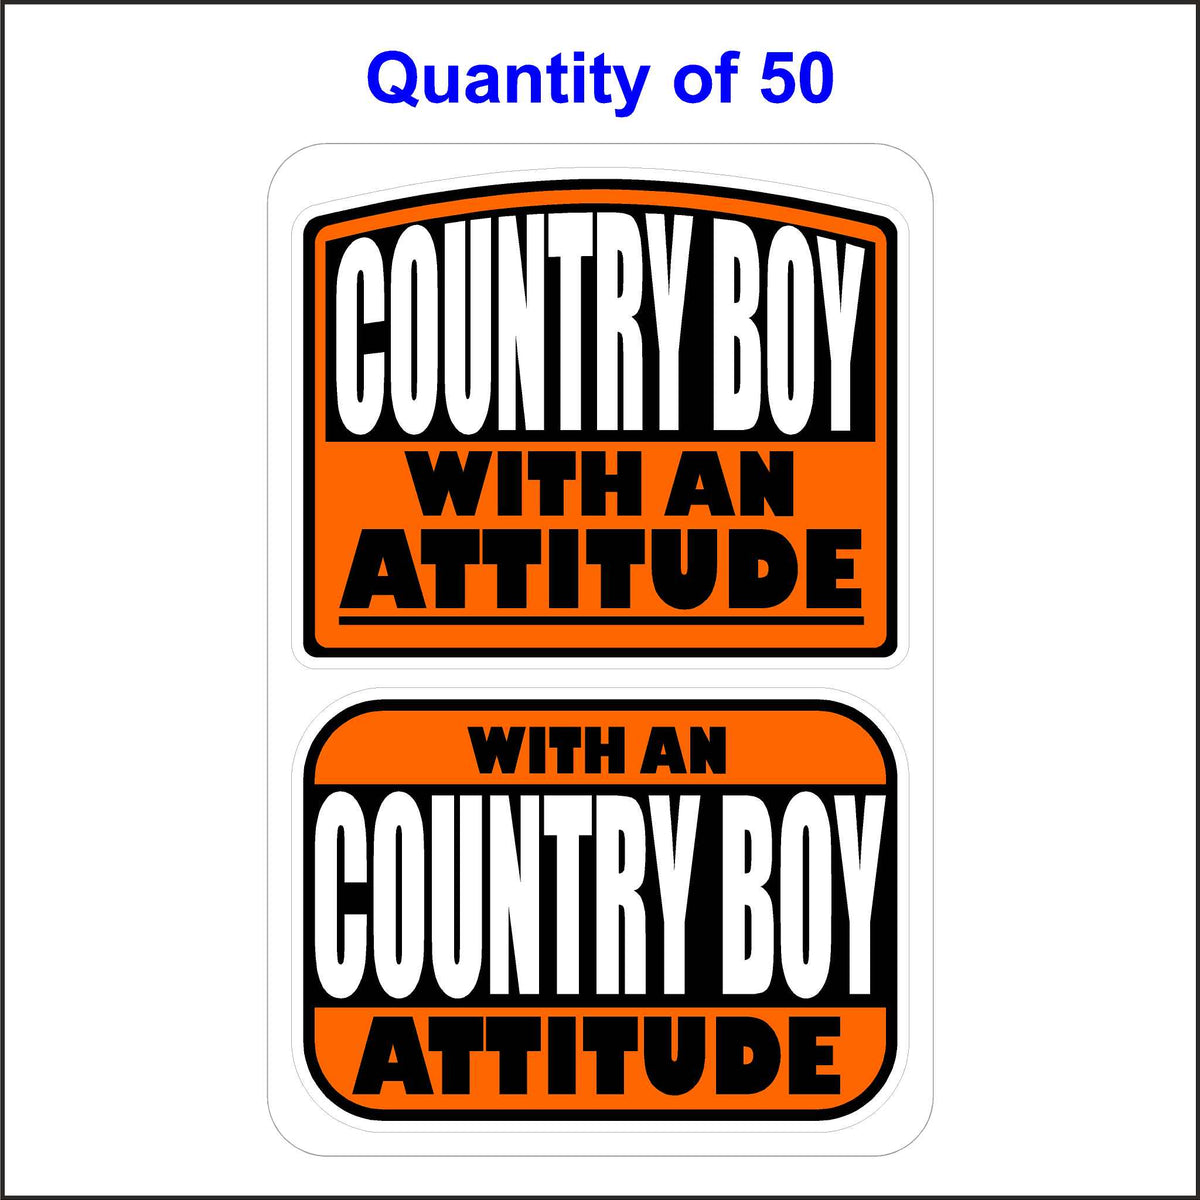 Country Boy with an Attitude Stickers 50 Quantity.